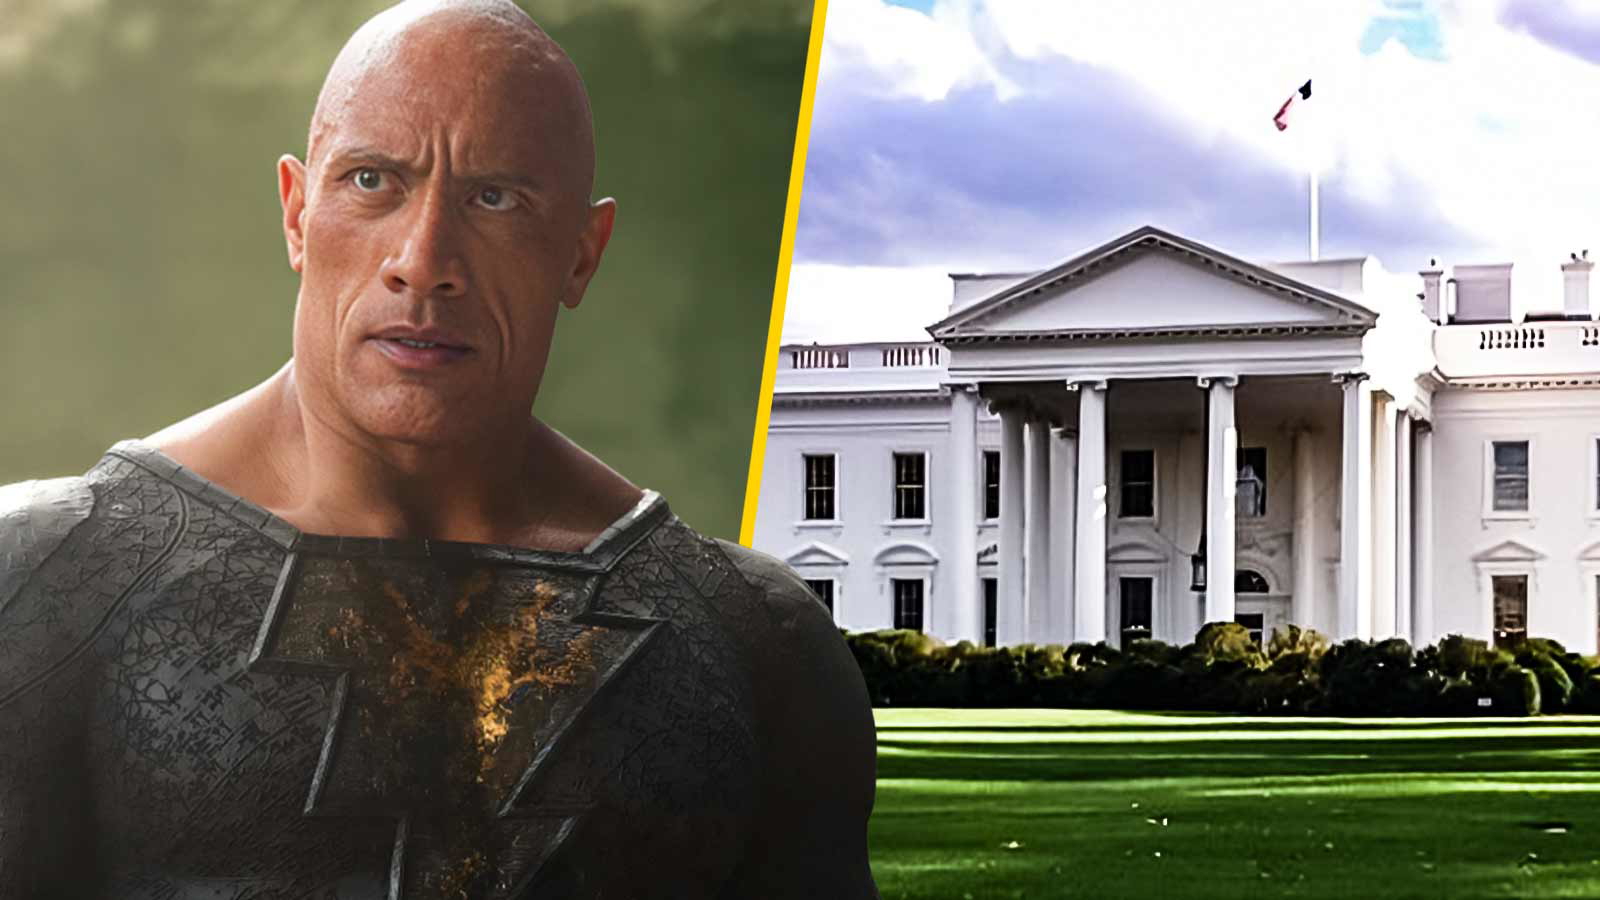 Why Dwayne Johnson Would Not Run For President Even If He Might be the First Hollywood Star to Win the Election?